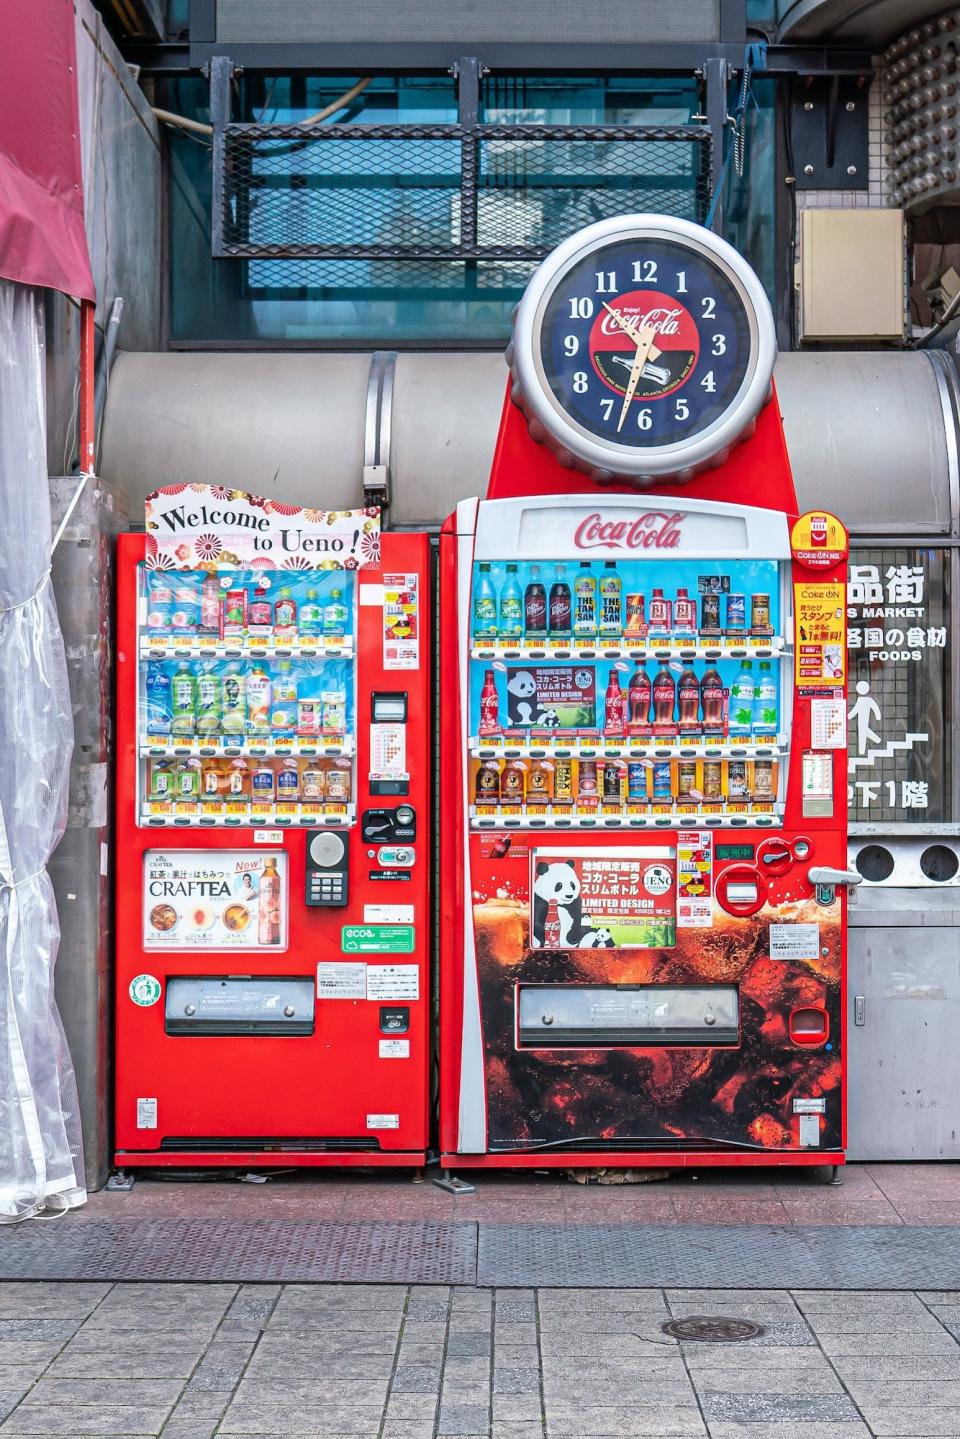 Japan’s Vending Machine Designs Are Like No Other Country’s